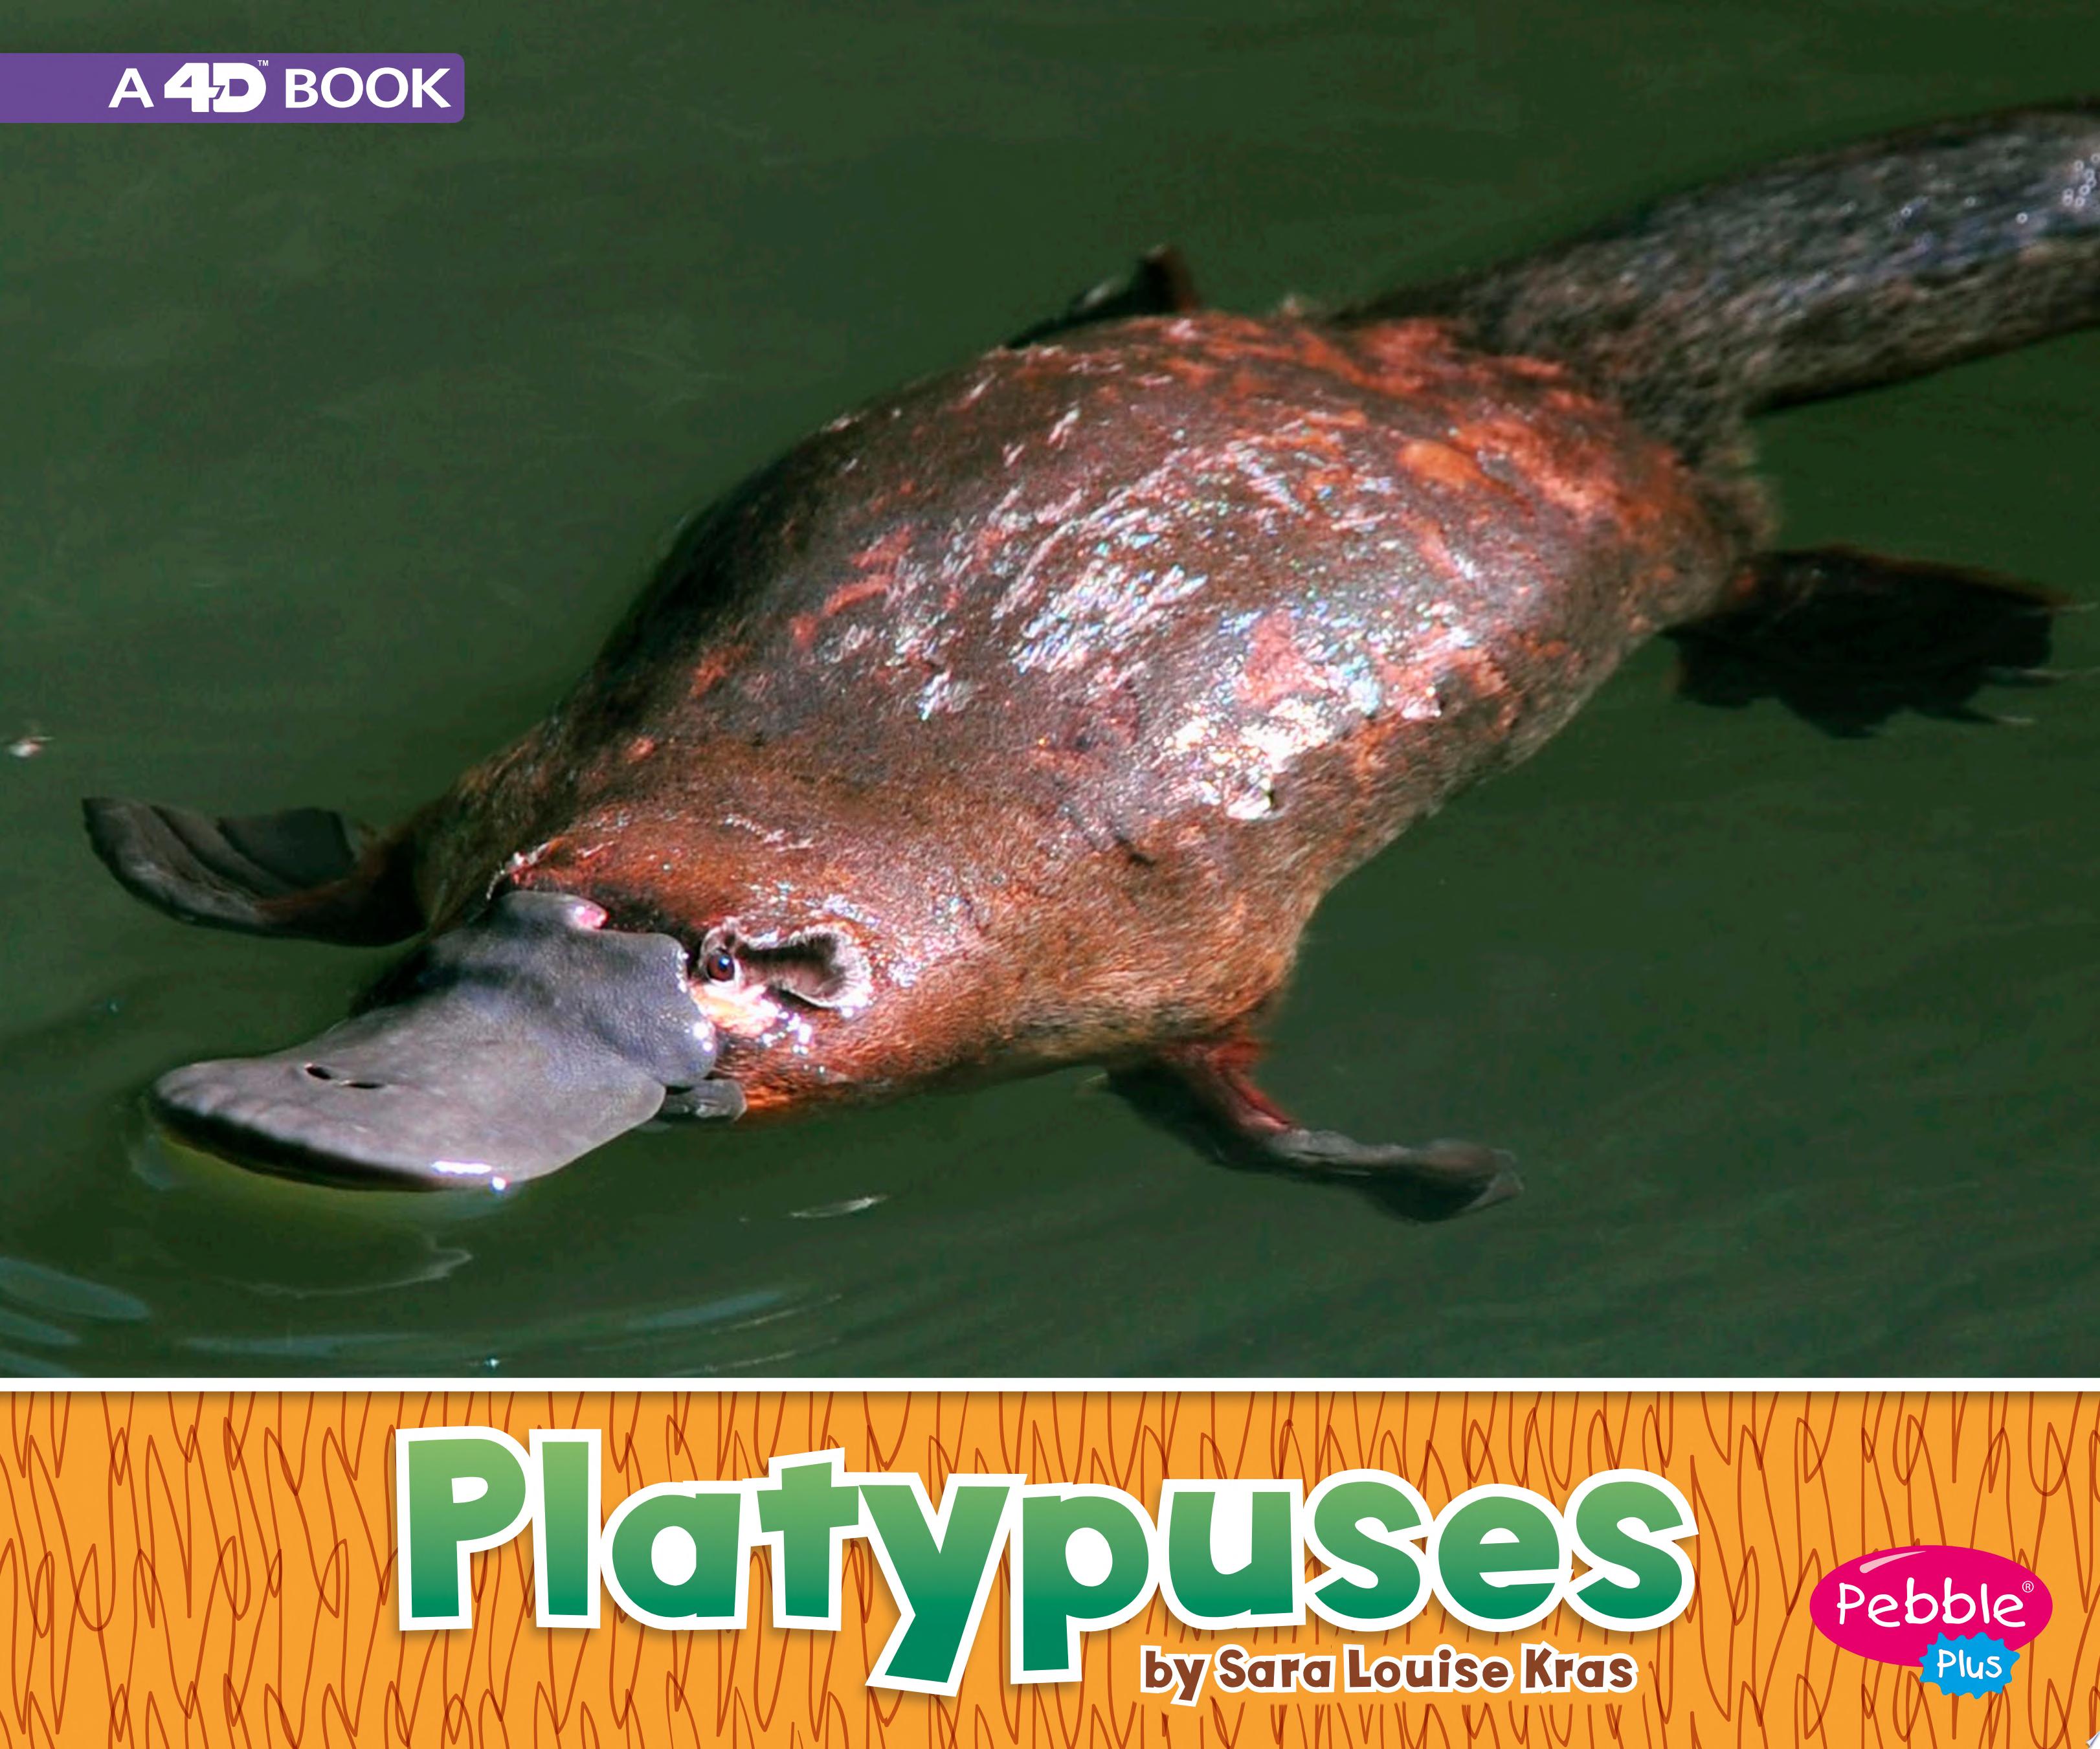 Image for "Platypuses"